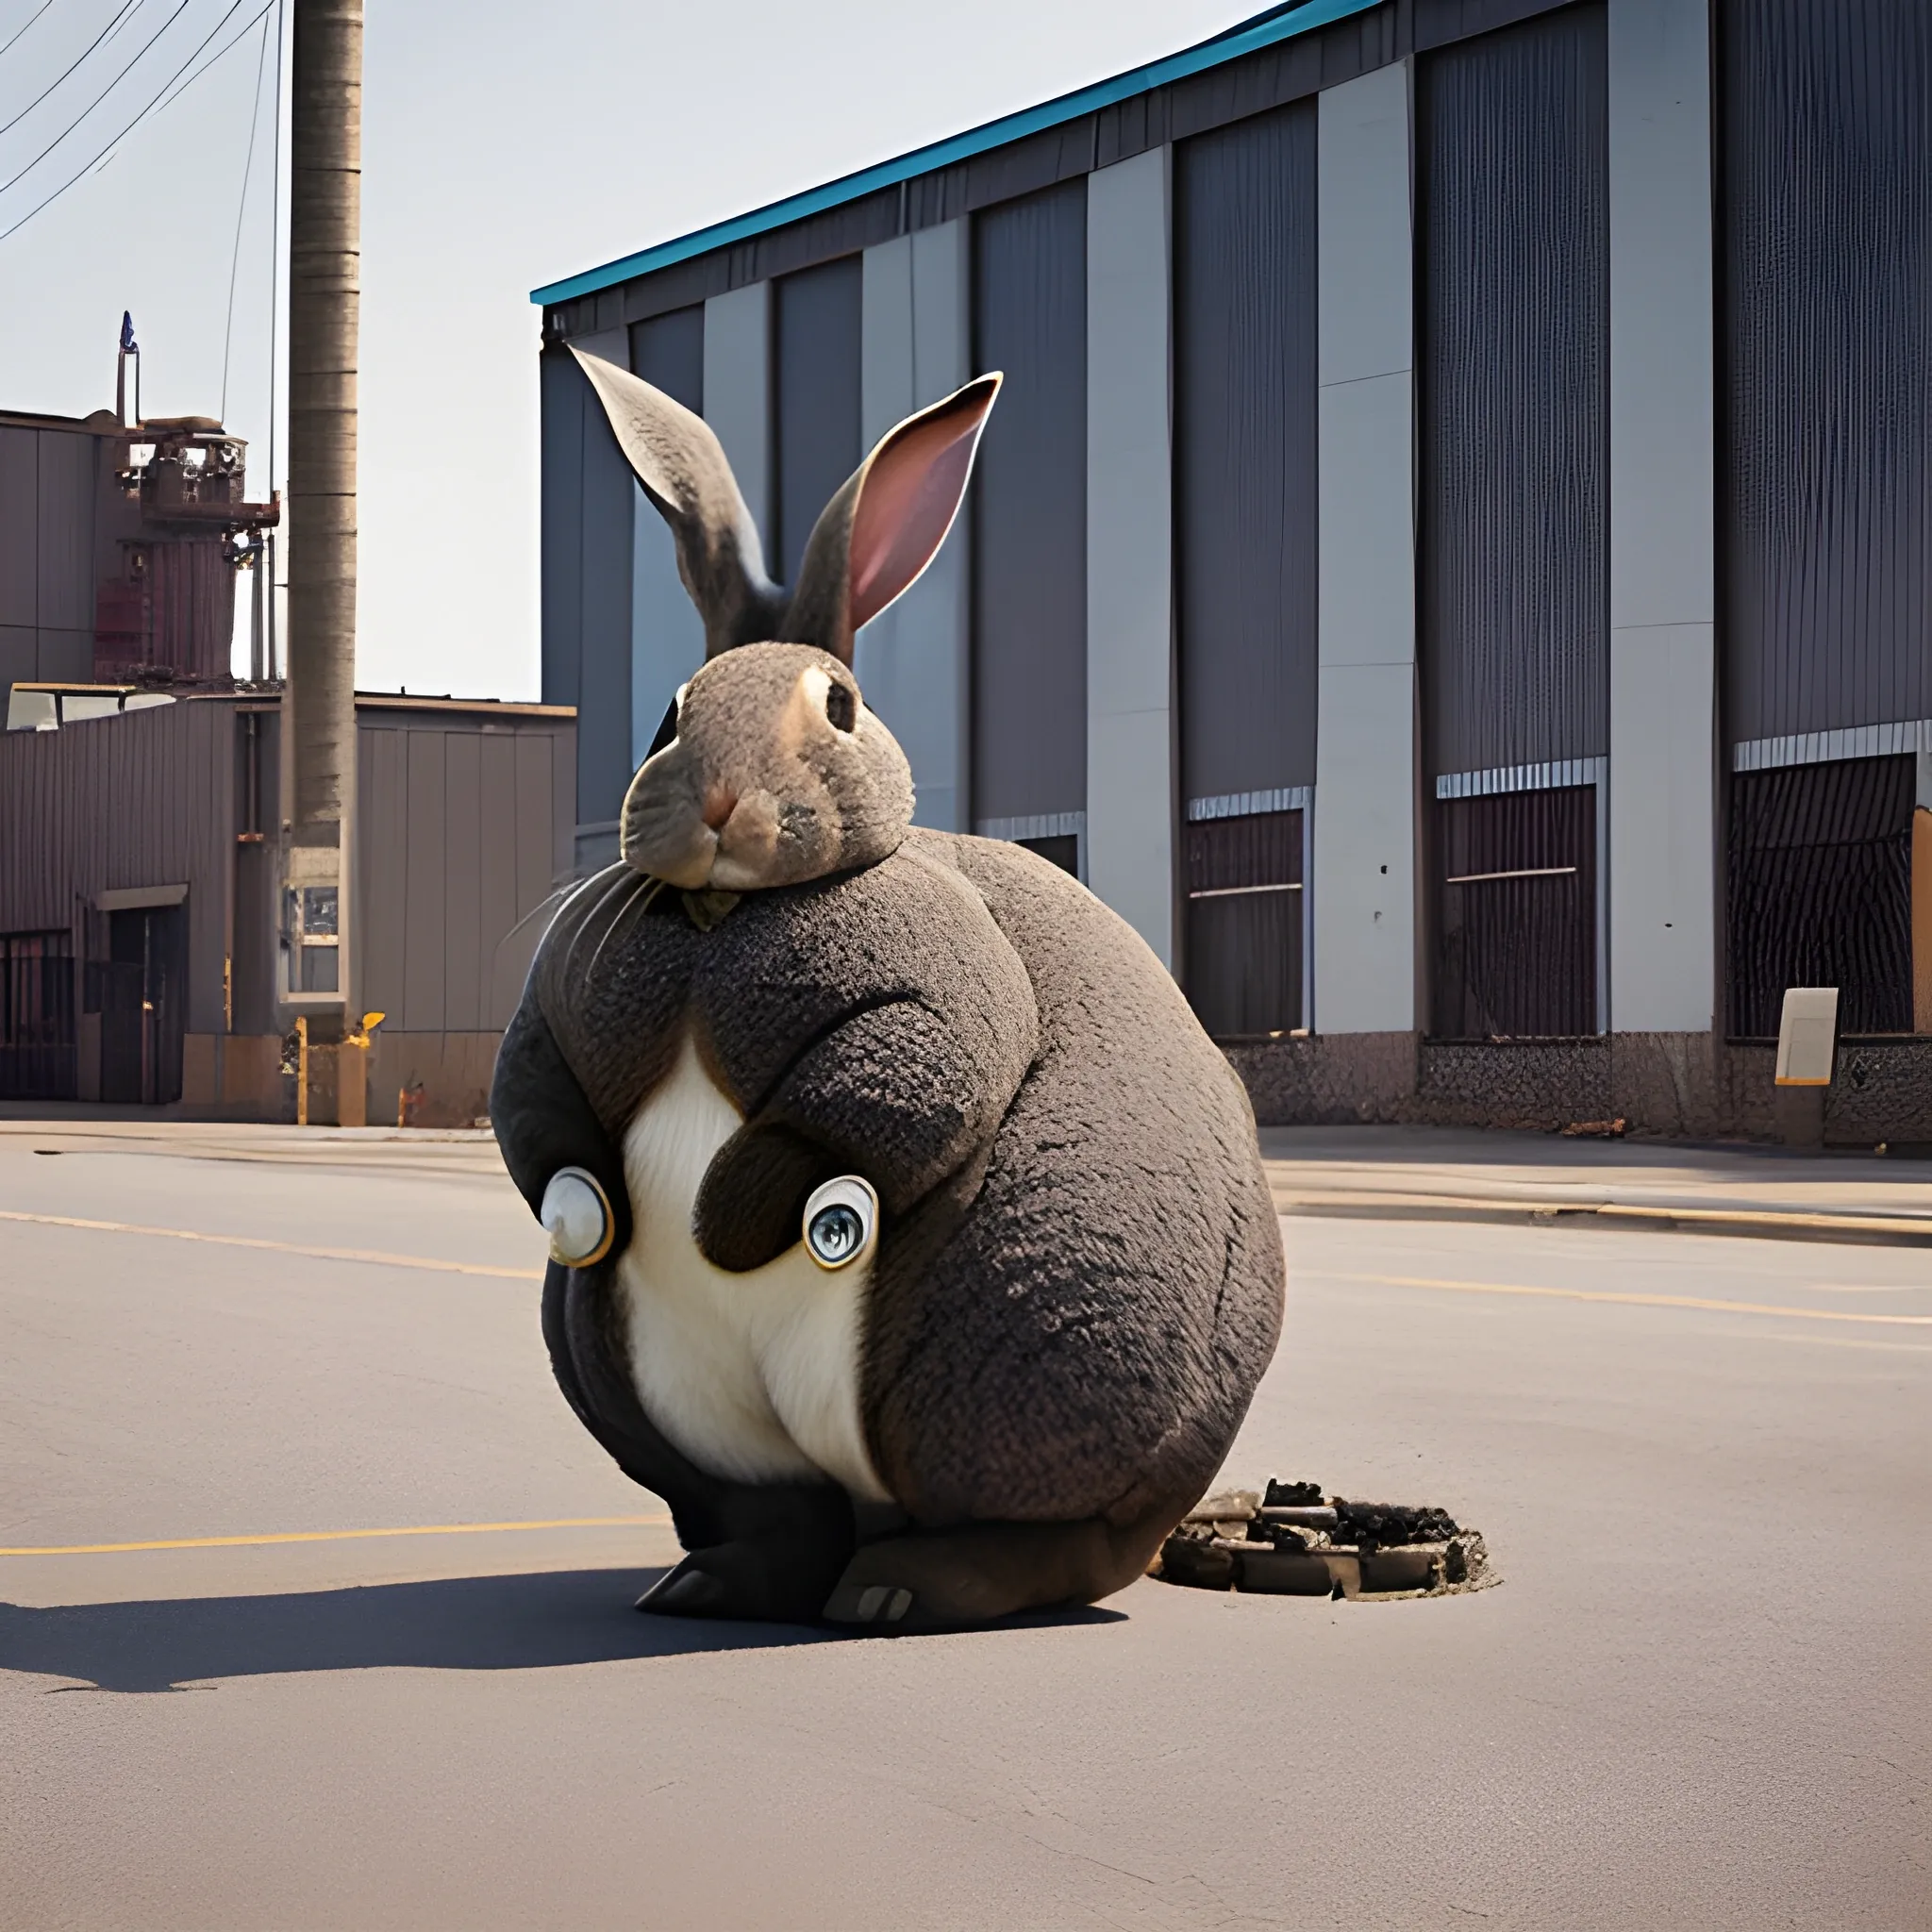 a large rabbit is eating tire in front of a factory, photograph